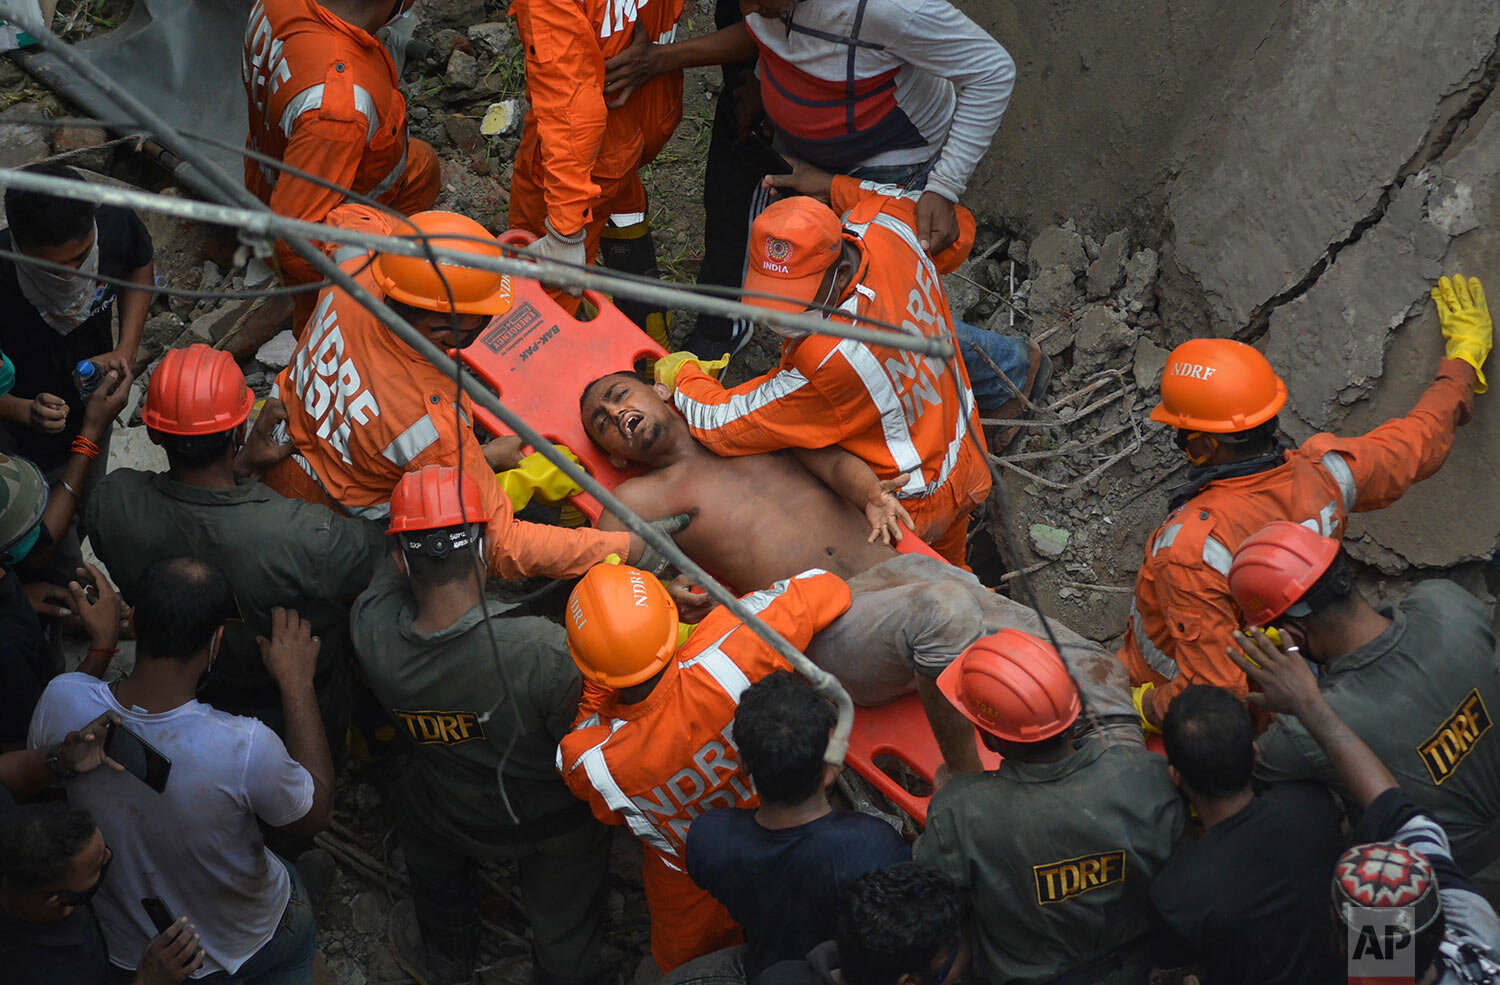  A man is rescued from the debris after a residential building collapsed in Bhiwandi in Thane district, a suburb of Mumbai, India, Monday, Sept. 21, 2020. (AP Photo/Praful Gangurde) 